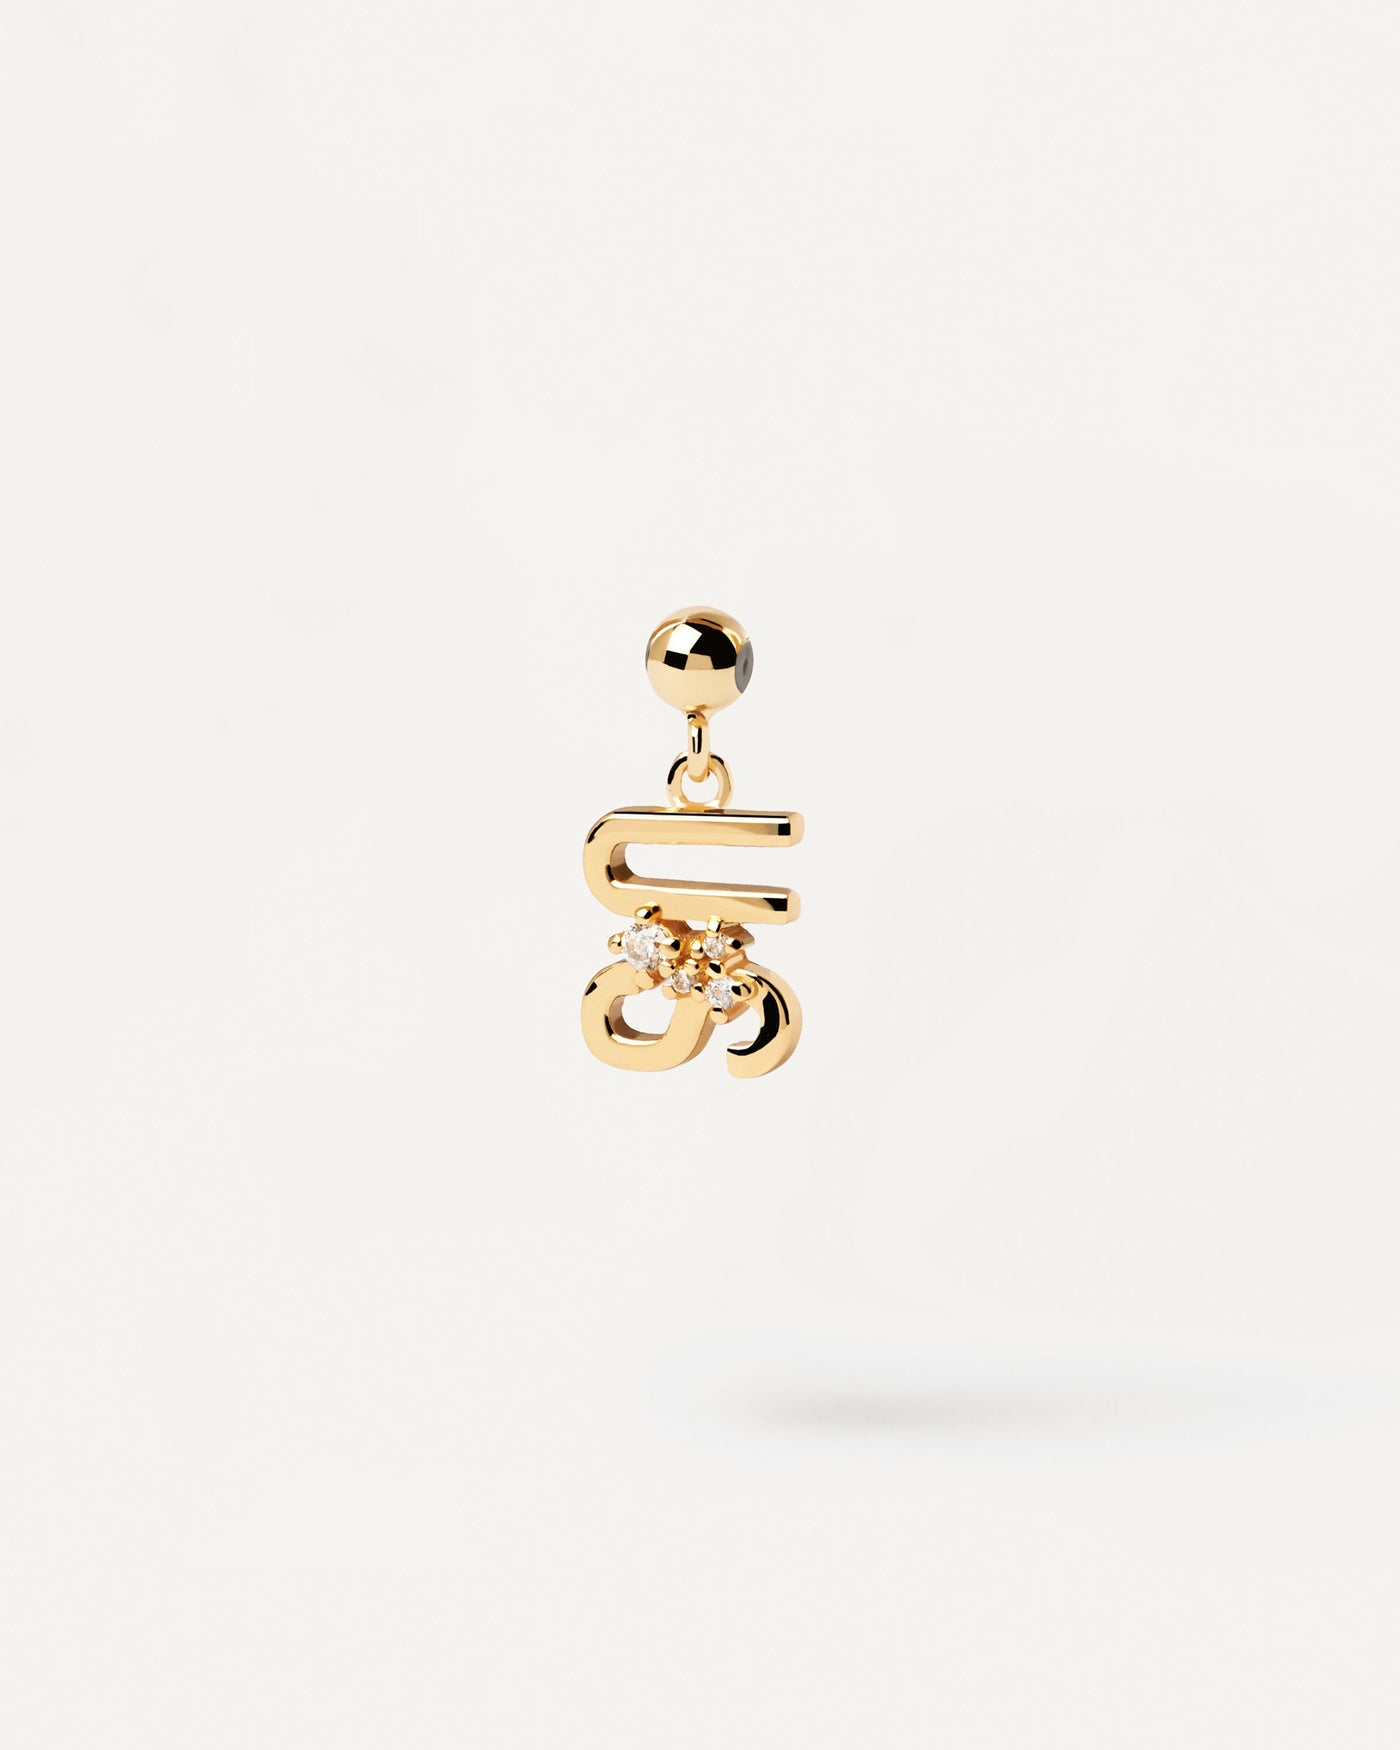 2023 Selection | Us Charm. Gold-plated silver Charm for necklace or bracelet to gift to friend, lover or family. Get the latest arrival from PDPAOLA. Place your order safely and get this Best Seller. Free Shipping.